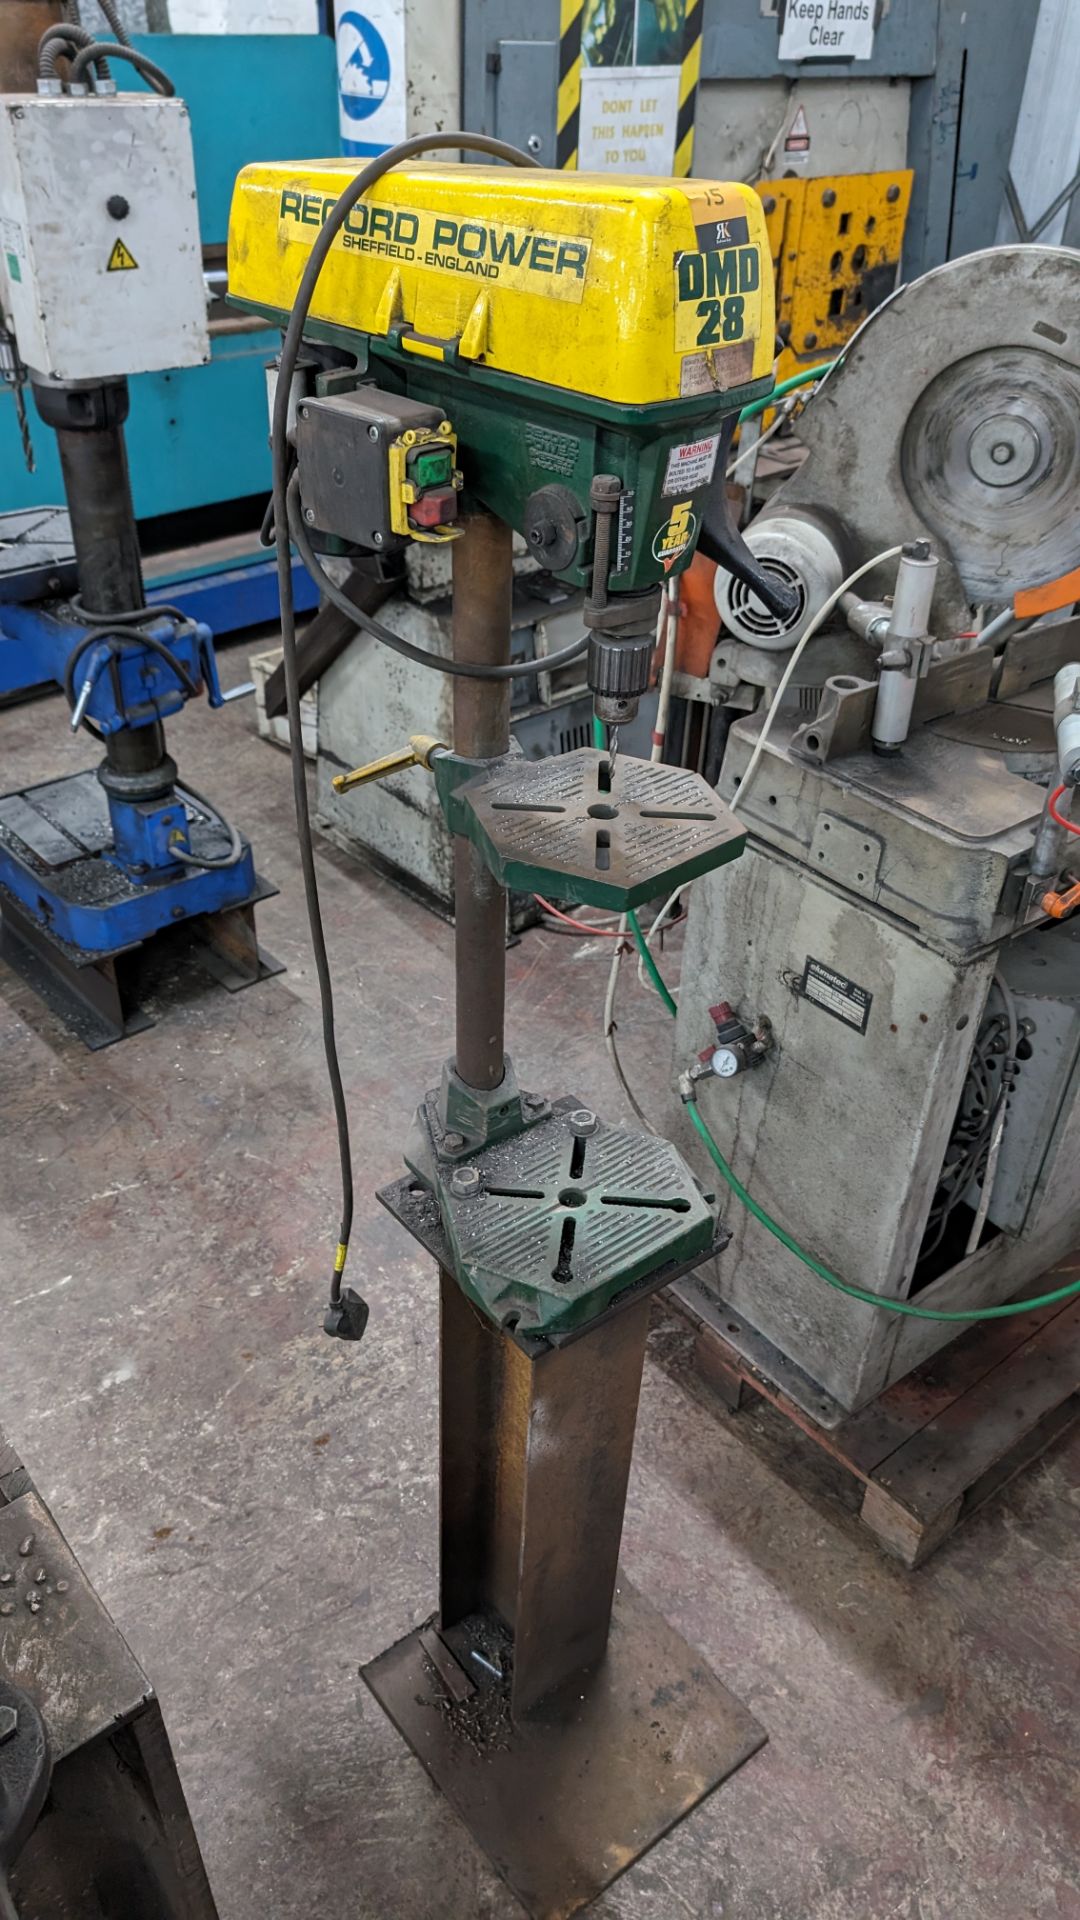 Record power model DMD28 drill on dedicated single pedestal heavy duty column stand - Image 4 of 5